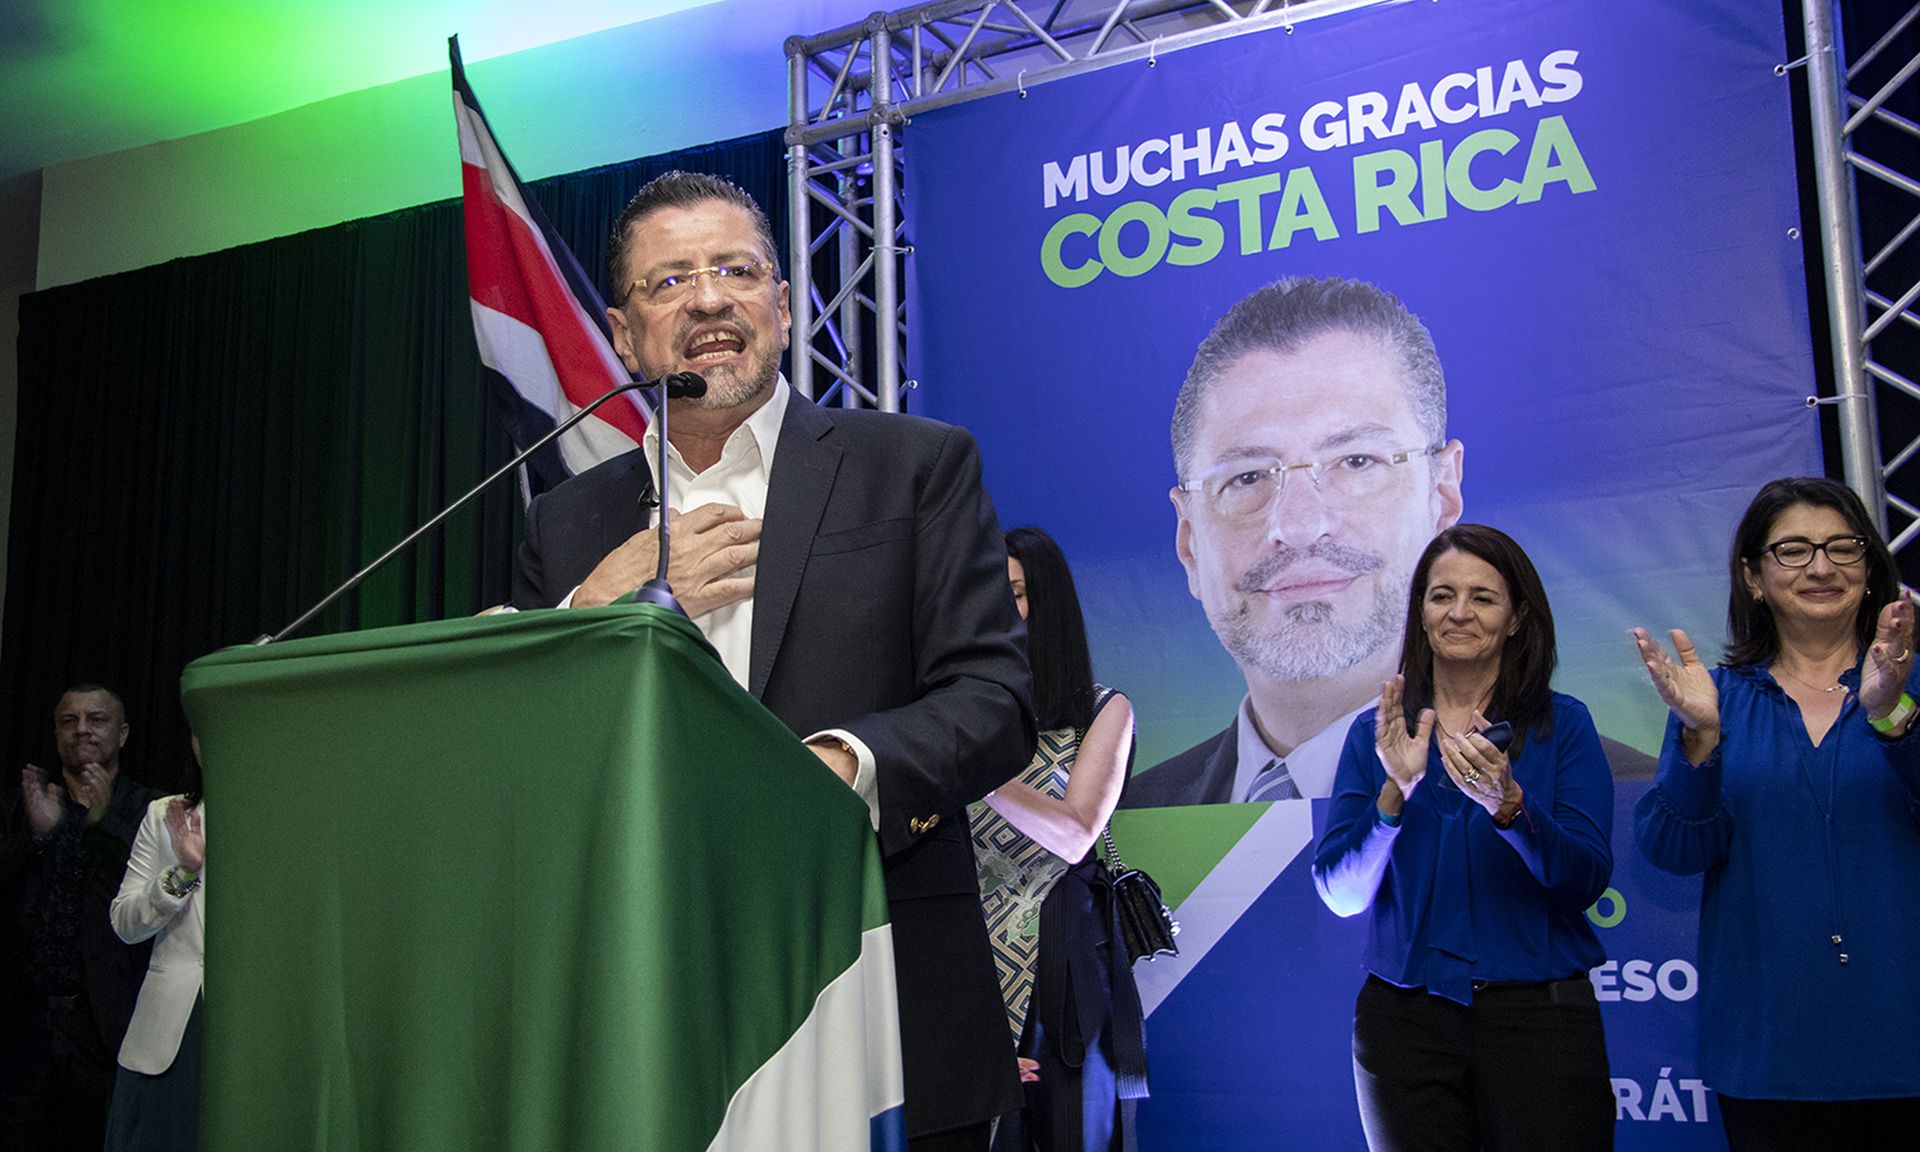 The U.S. Department of State announced a $10 million reward for information leading to the identification of the leadership of the Conti ransomware group. Pictured: Presidential candidate Rodrigo Chaves of Progreso Social Democrático Party celebrates on April 3, 2022, in San Jose, Costa Rica. (Photo by Arnoldo Robert/Getty Images)